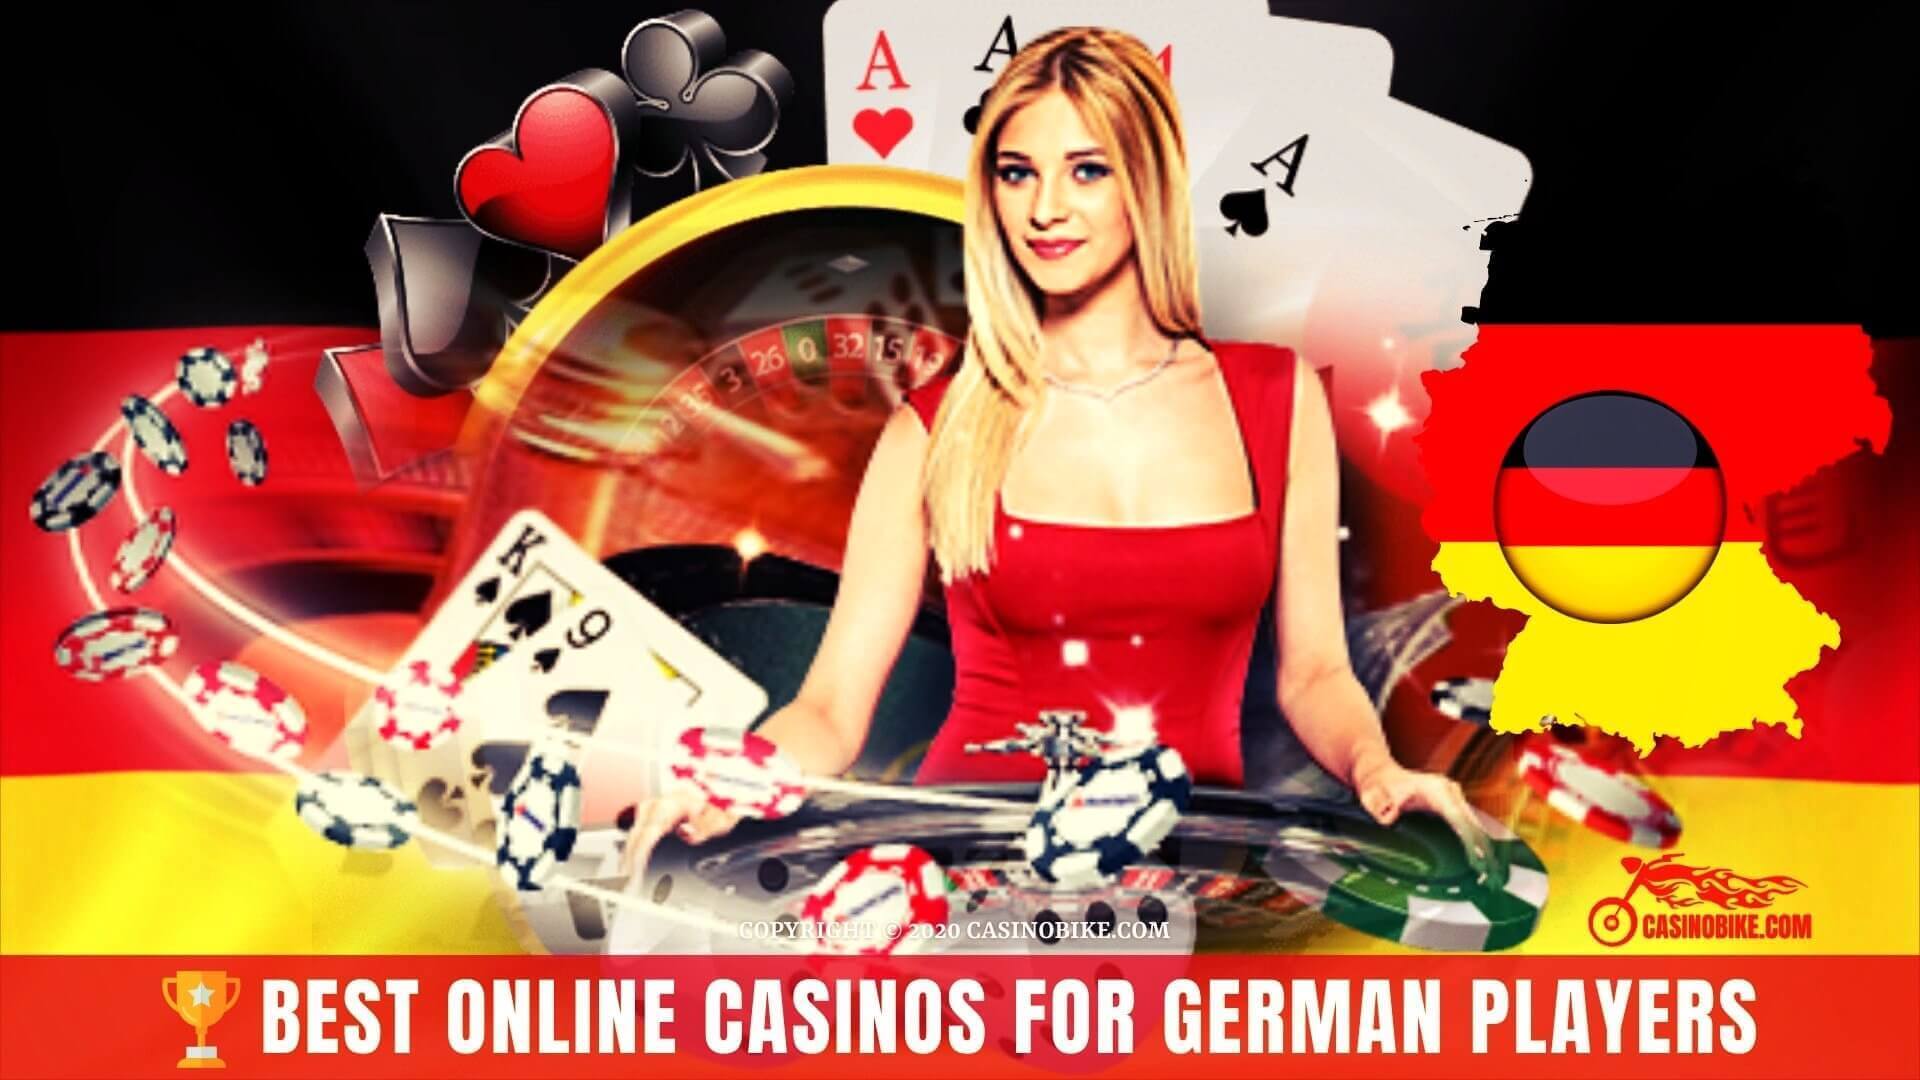 Best Online Casinos For German Players